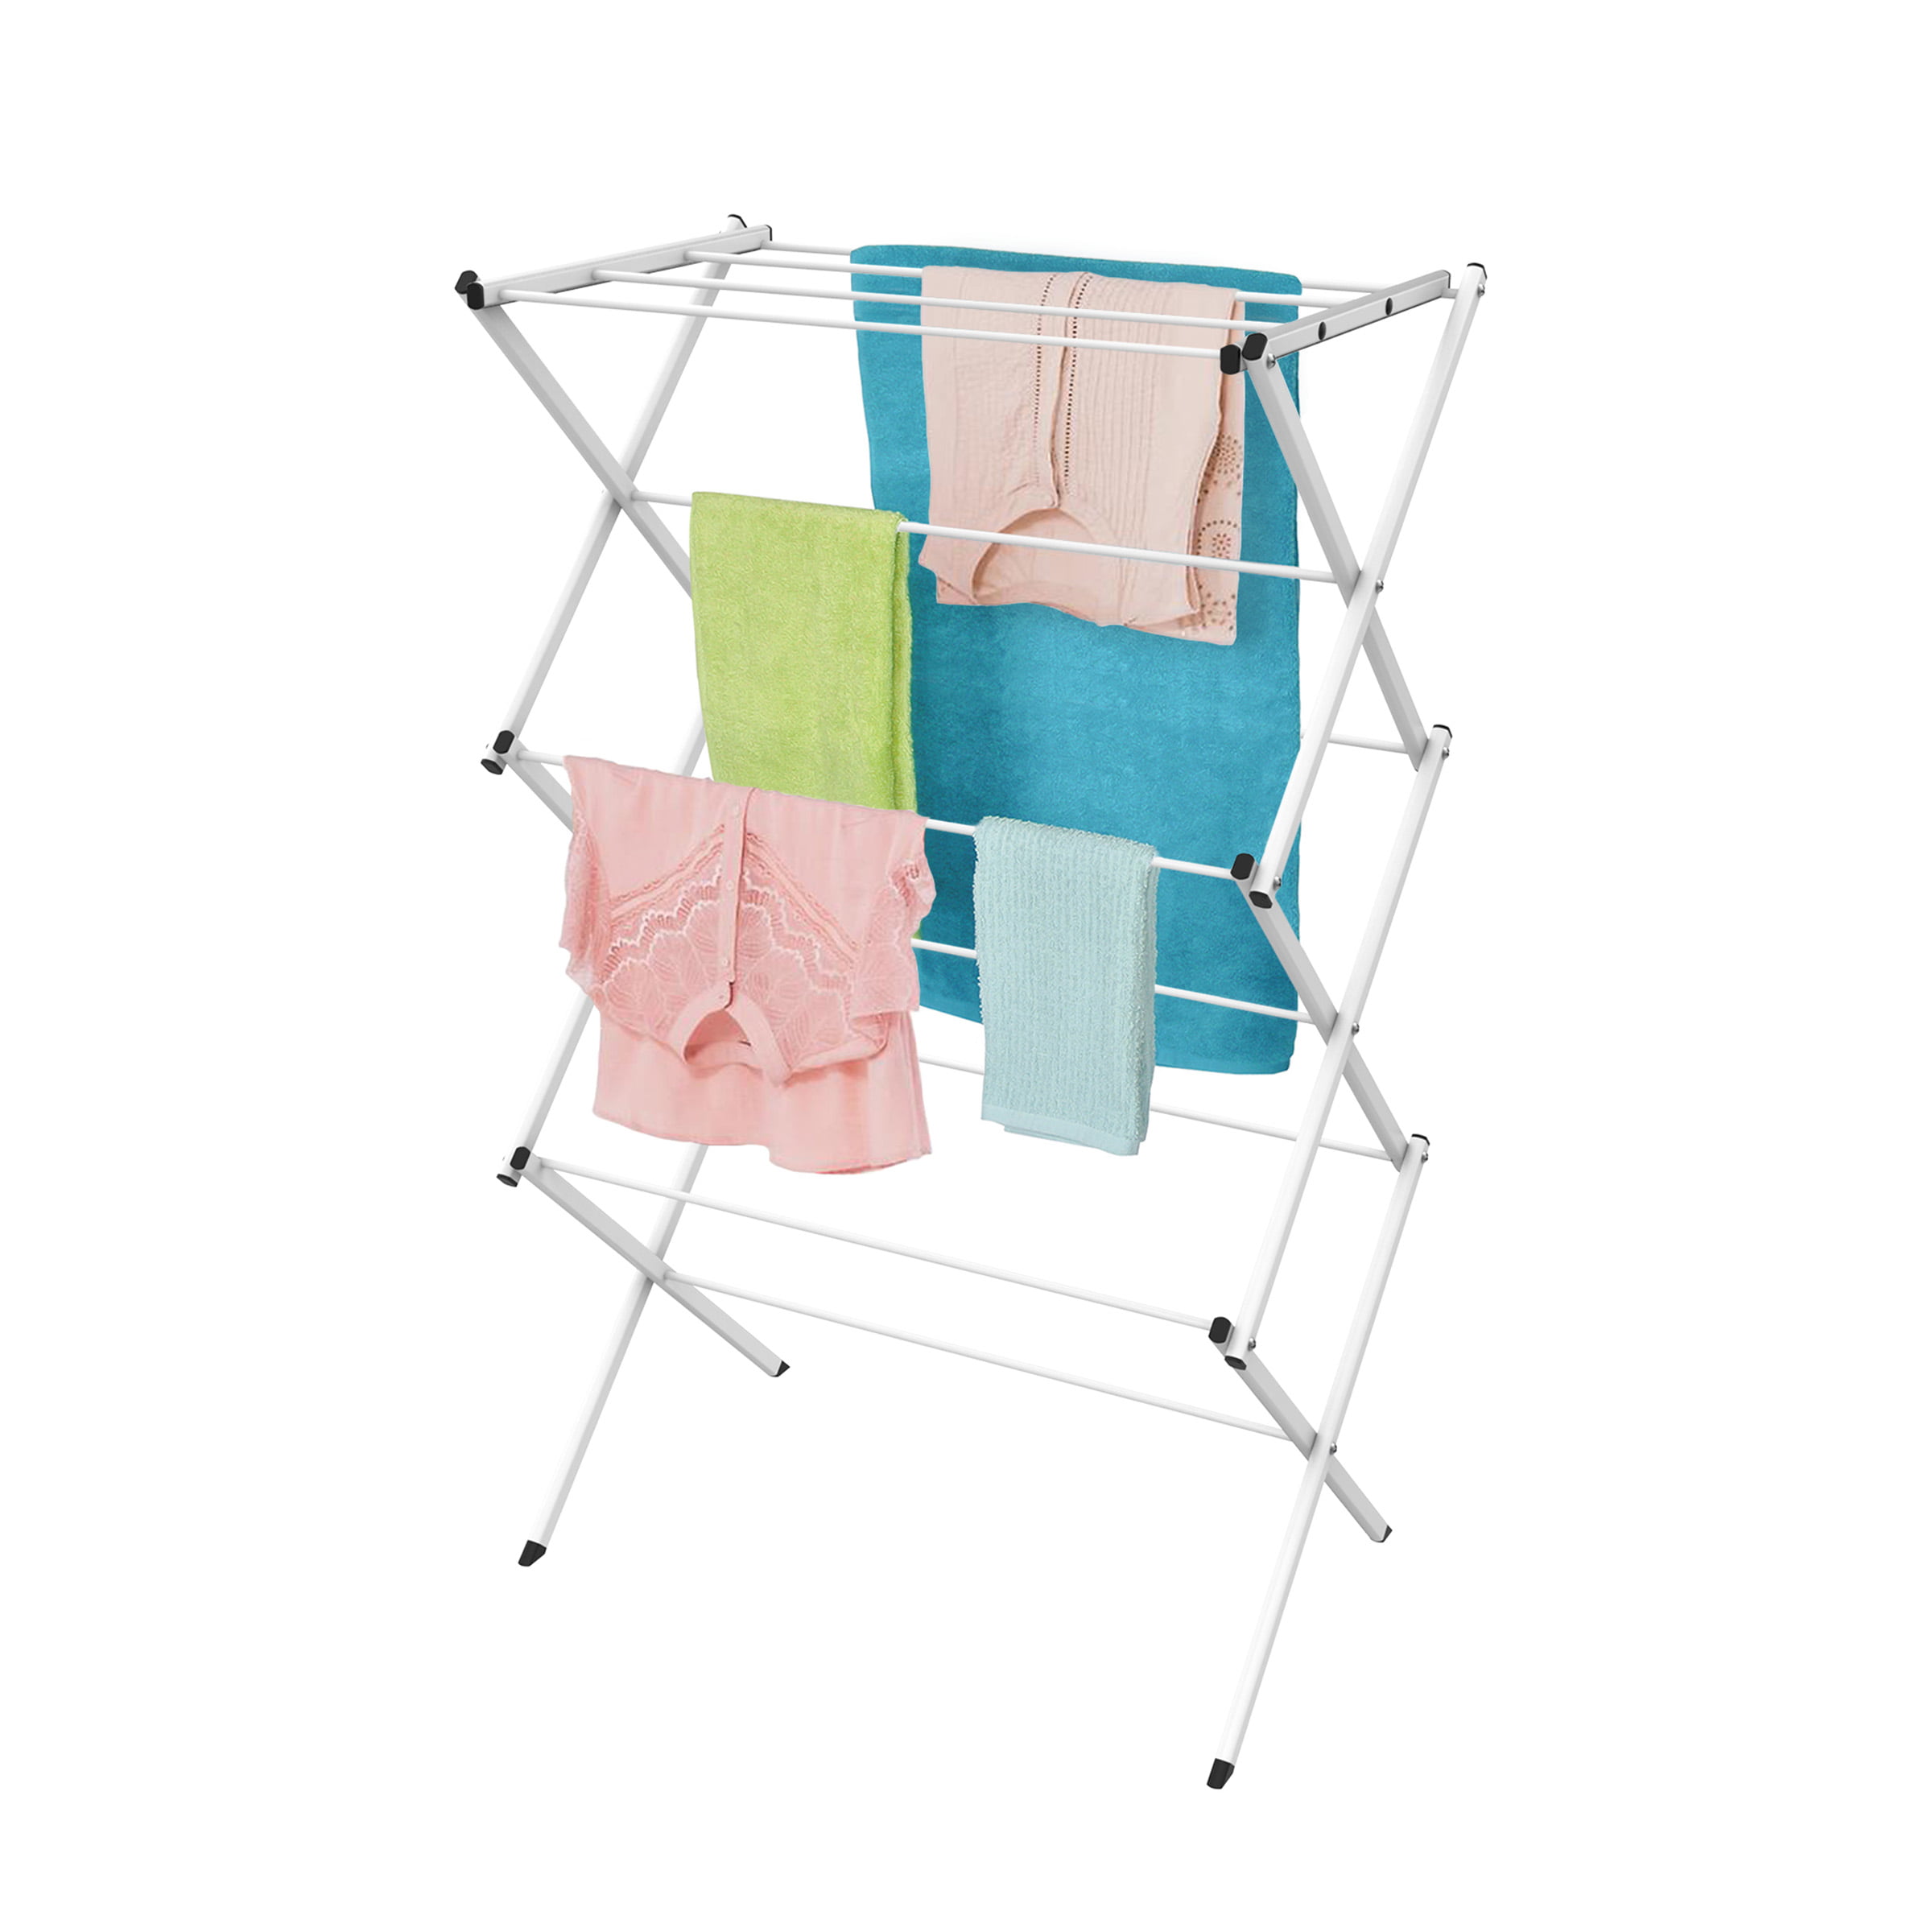 Clothes Drying Rack24ft. of Drying SpaceCollapsible and Compact for Indoor/Outdoor Use By